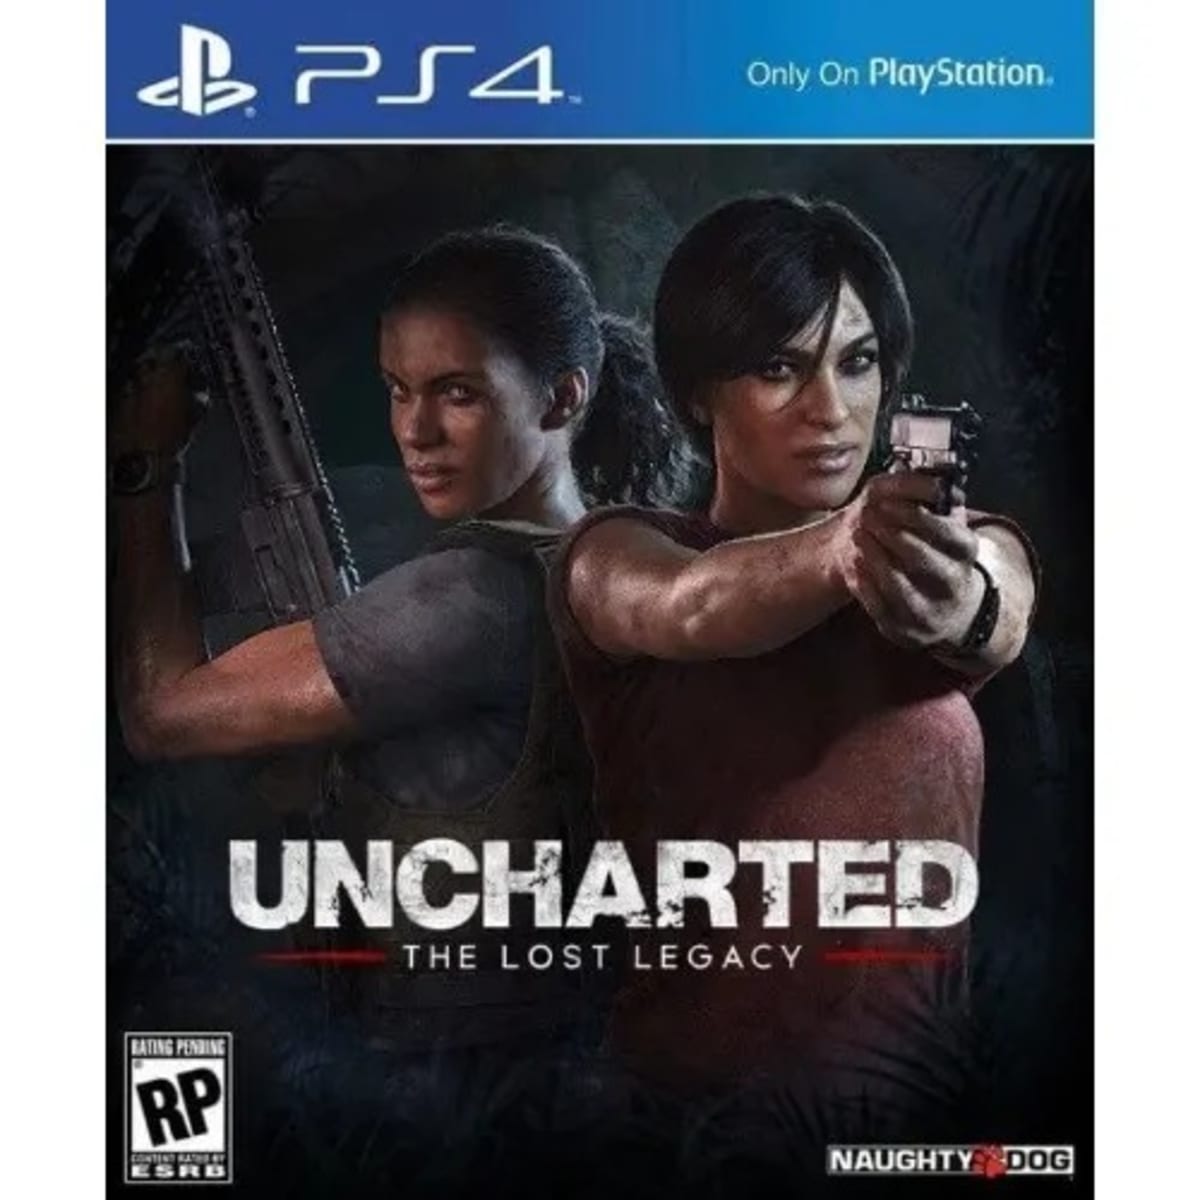 UNCHARTED THE LOST LEGACY PS4 P4DA00724101FGM ORIGINAL SONY